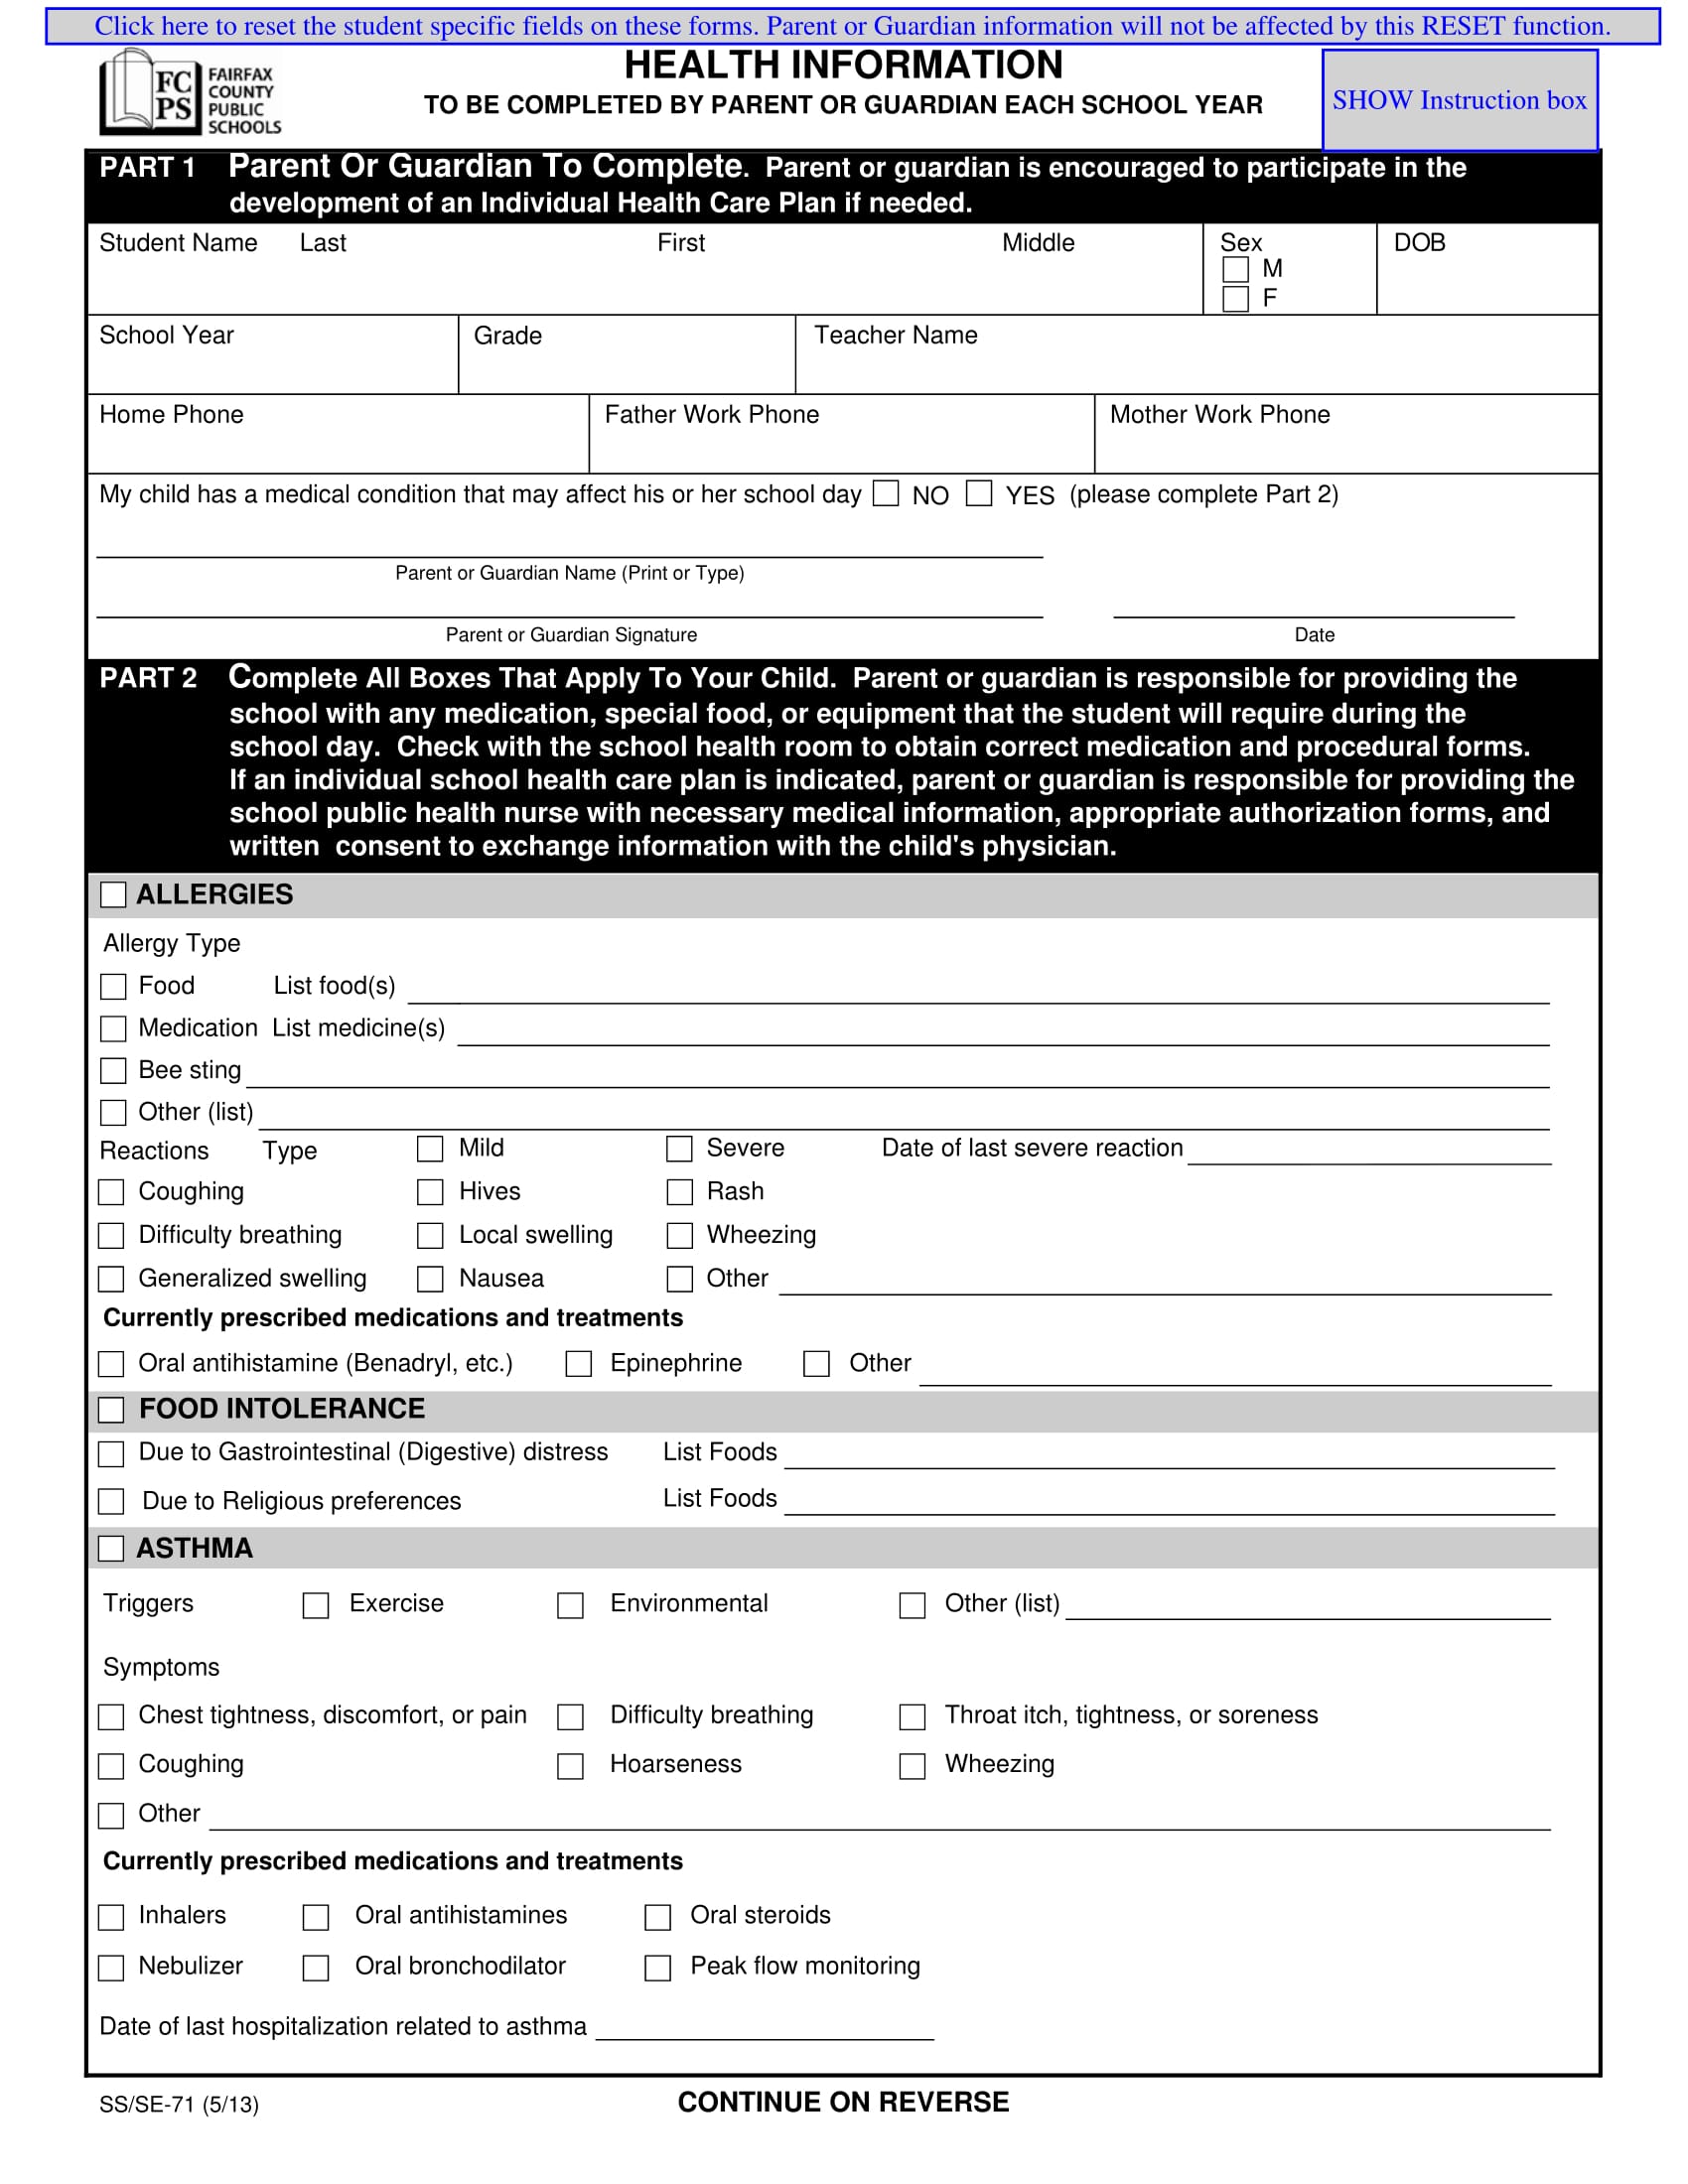 students’ health information form 1